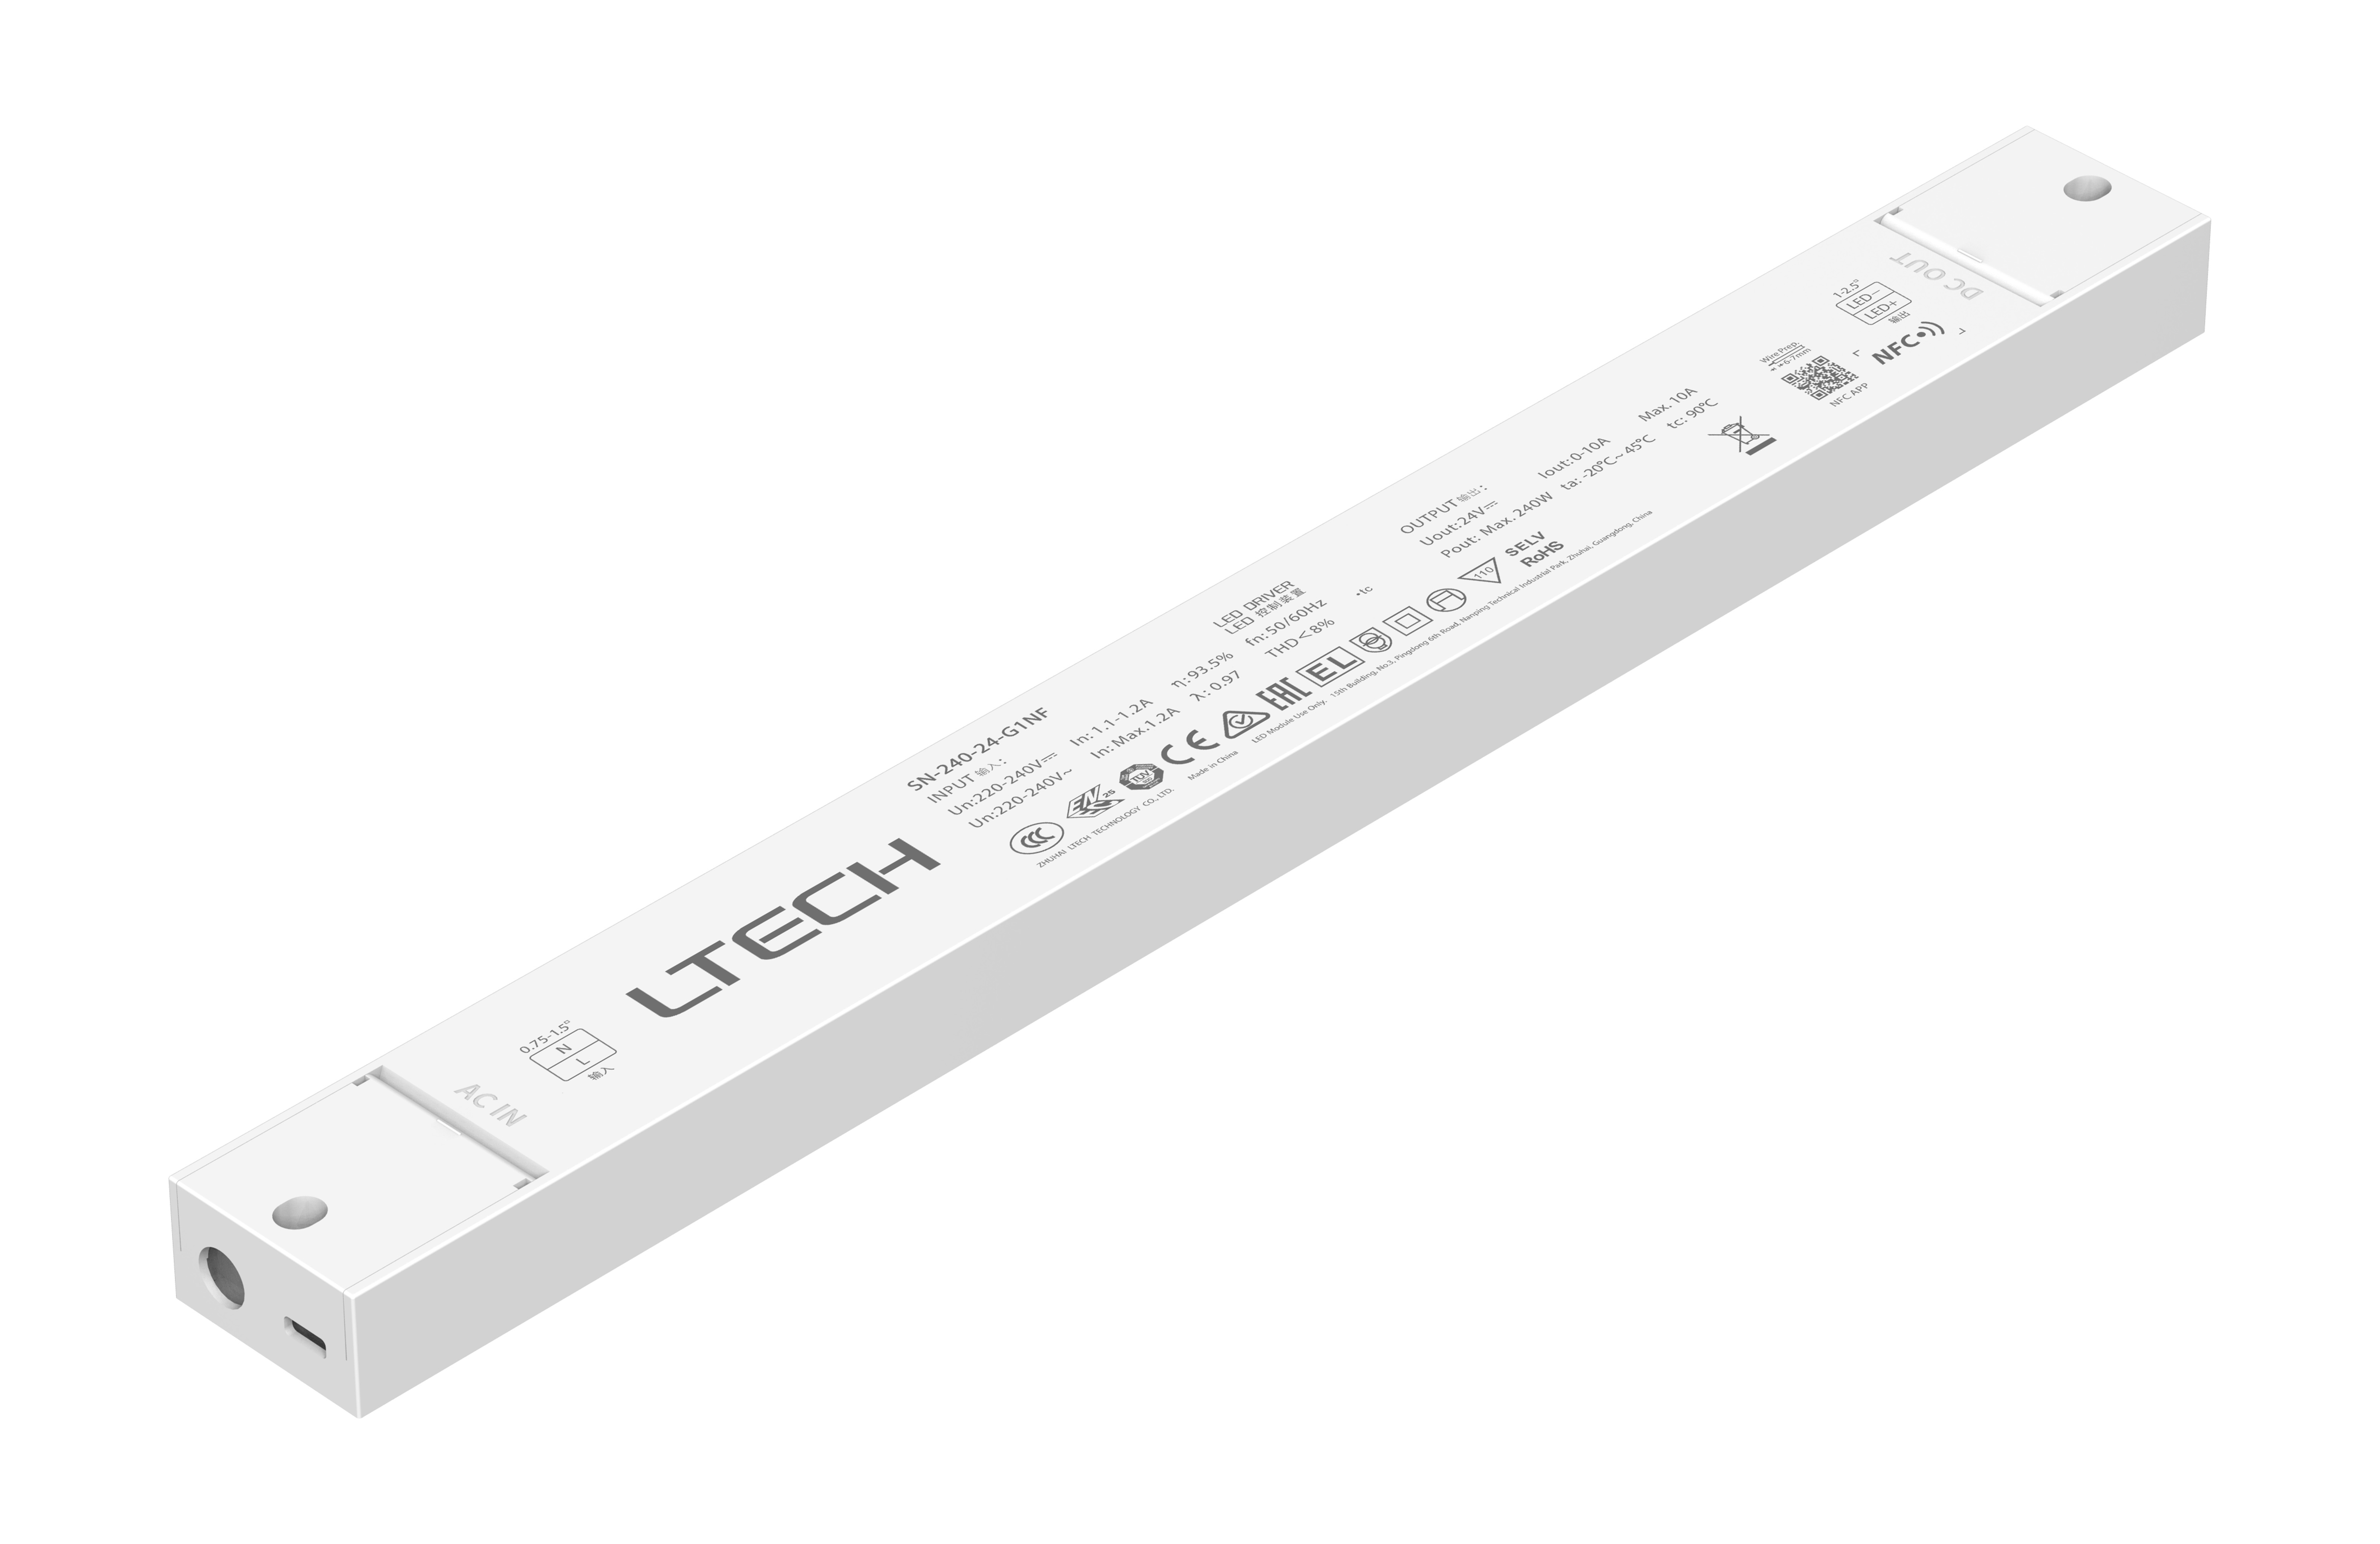 SN-240-24-G1NF-NFC  Intelligent Constant Current NFC ON/OFF LED Driver,  240W, 24VDC 10A , 220-240Vac, IP20, 5yrs Warrenty.